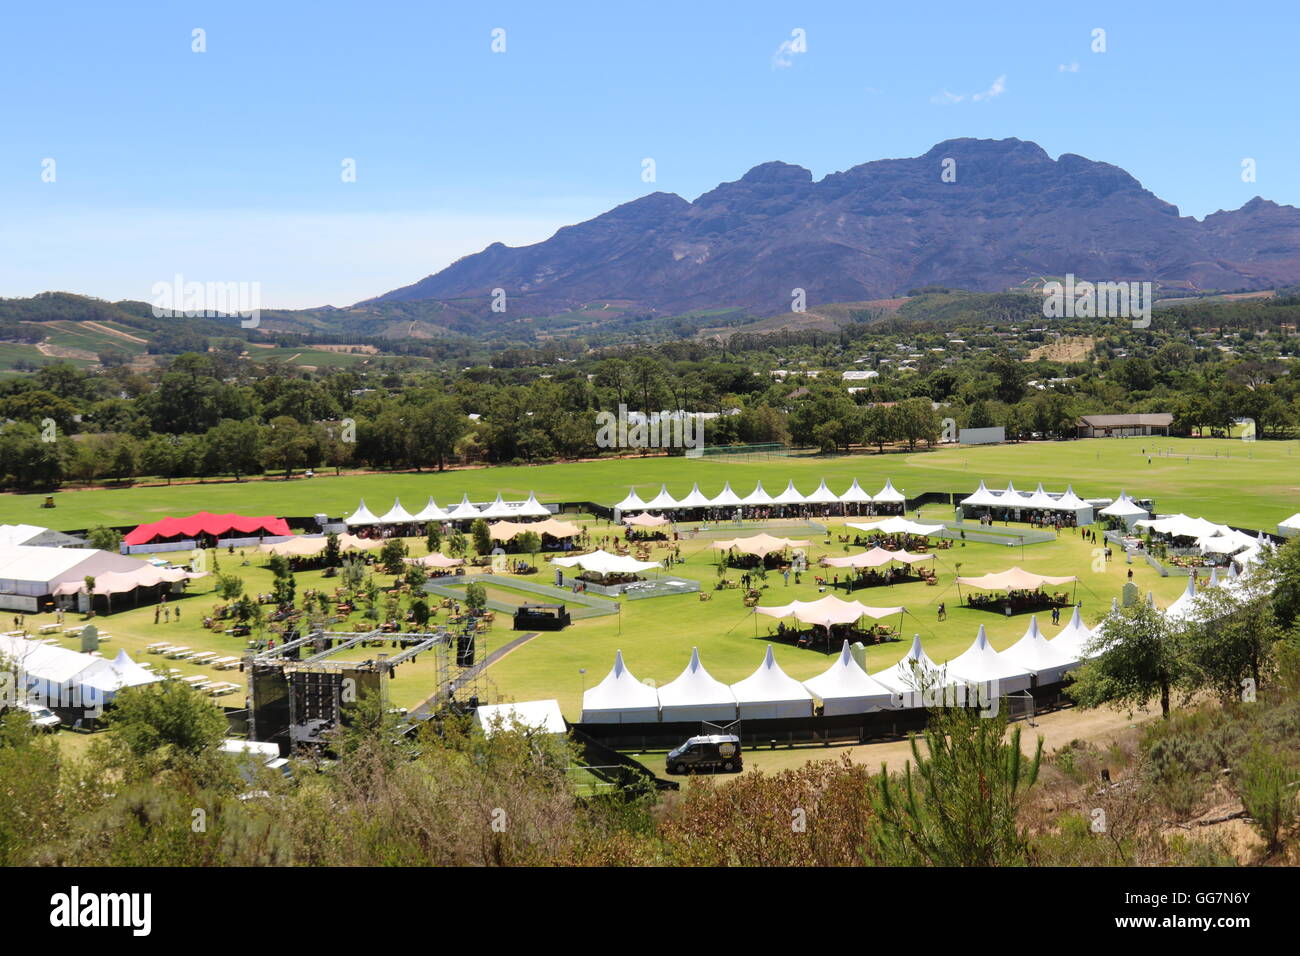 view onto the festival ground at the 2016 Stellenbosch Wine Festival with the mountains in the background Stock Photo